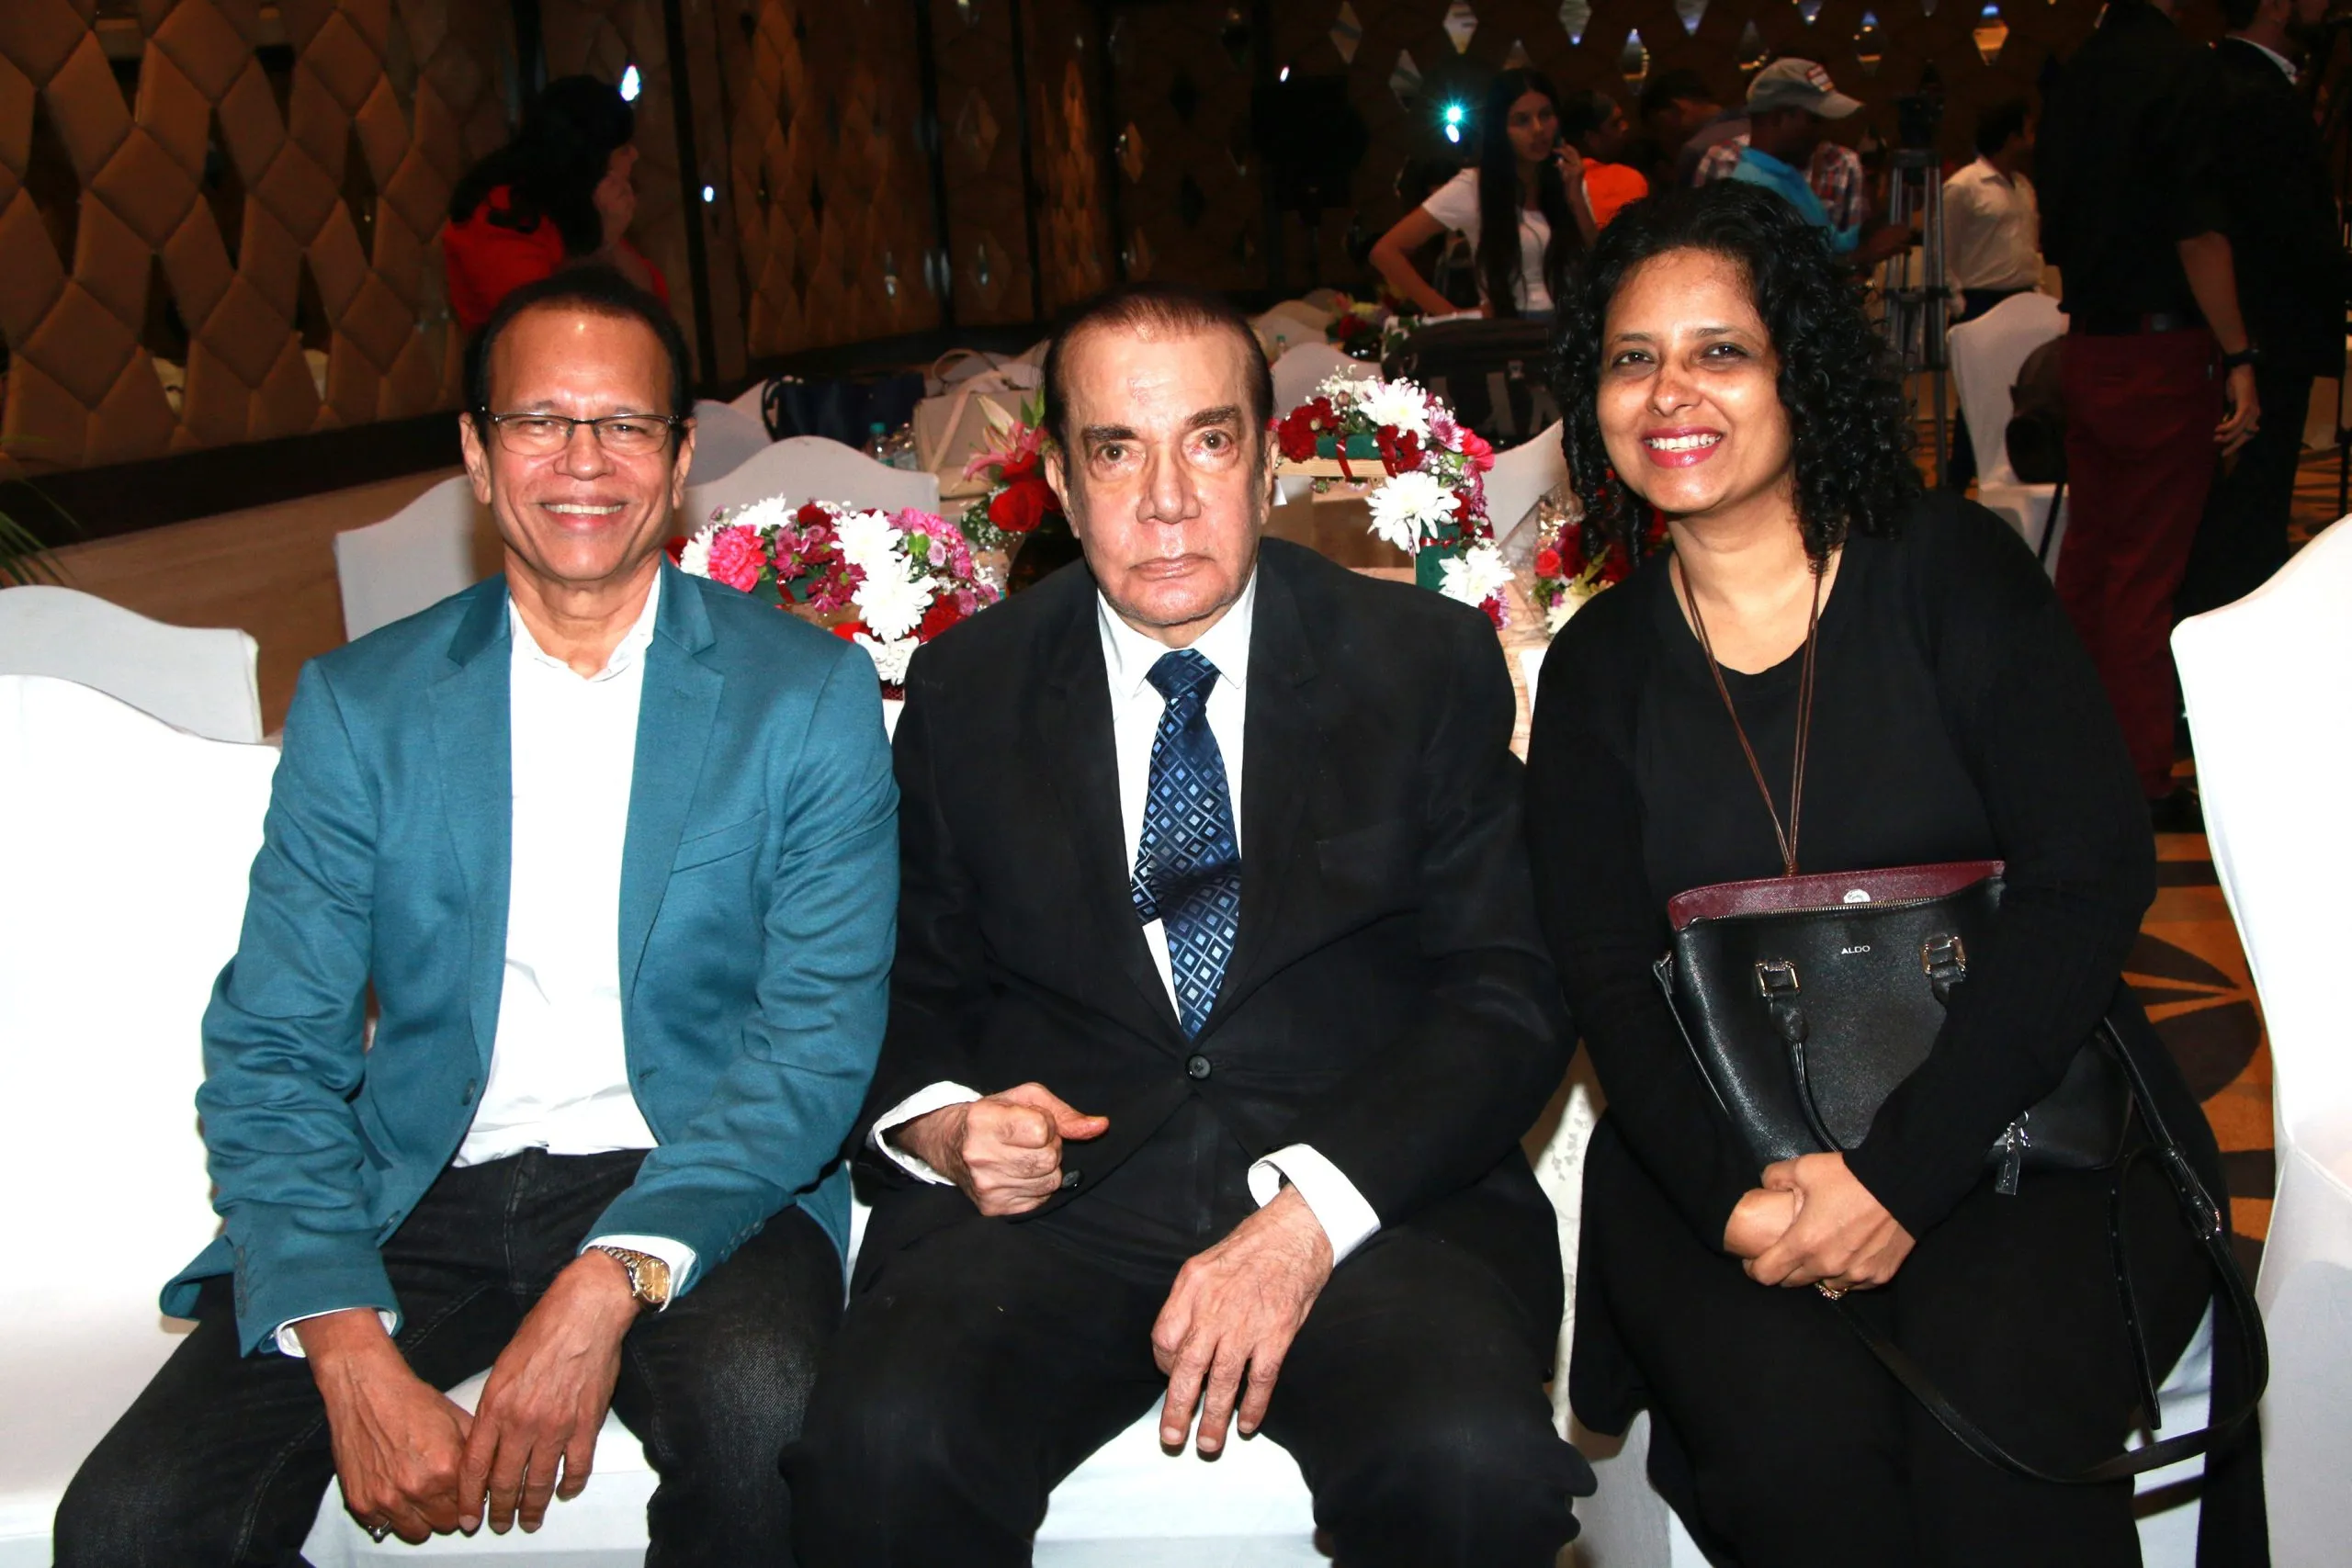 Ashok Dhamankar, Nari Hira and Andrea Costabir at the cover unveiling of Society Achievers Magazine